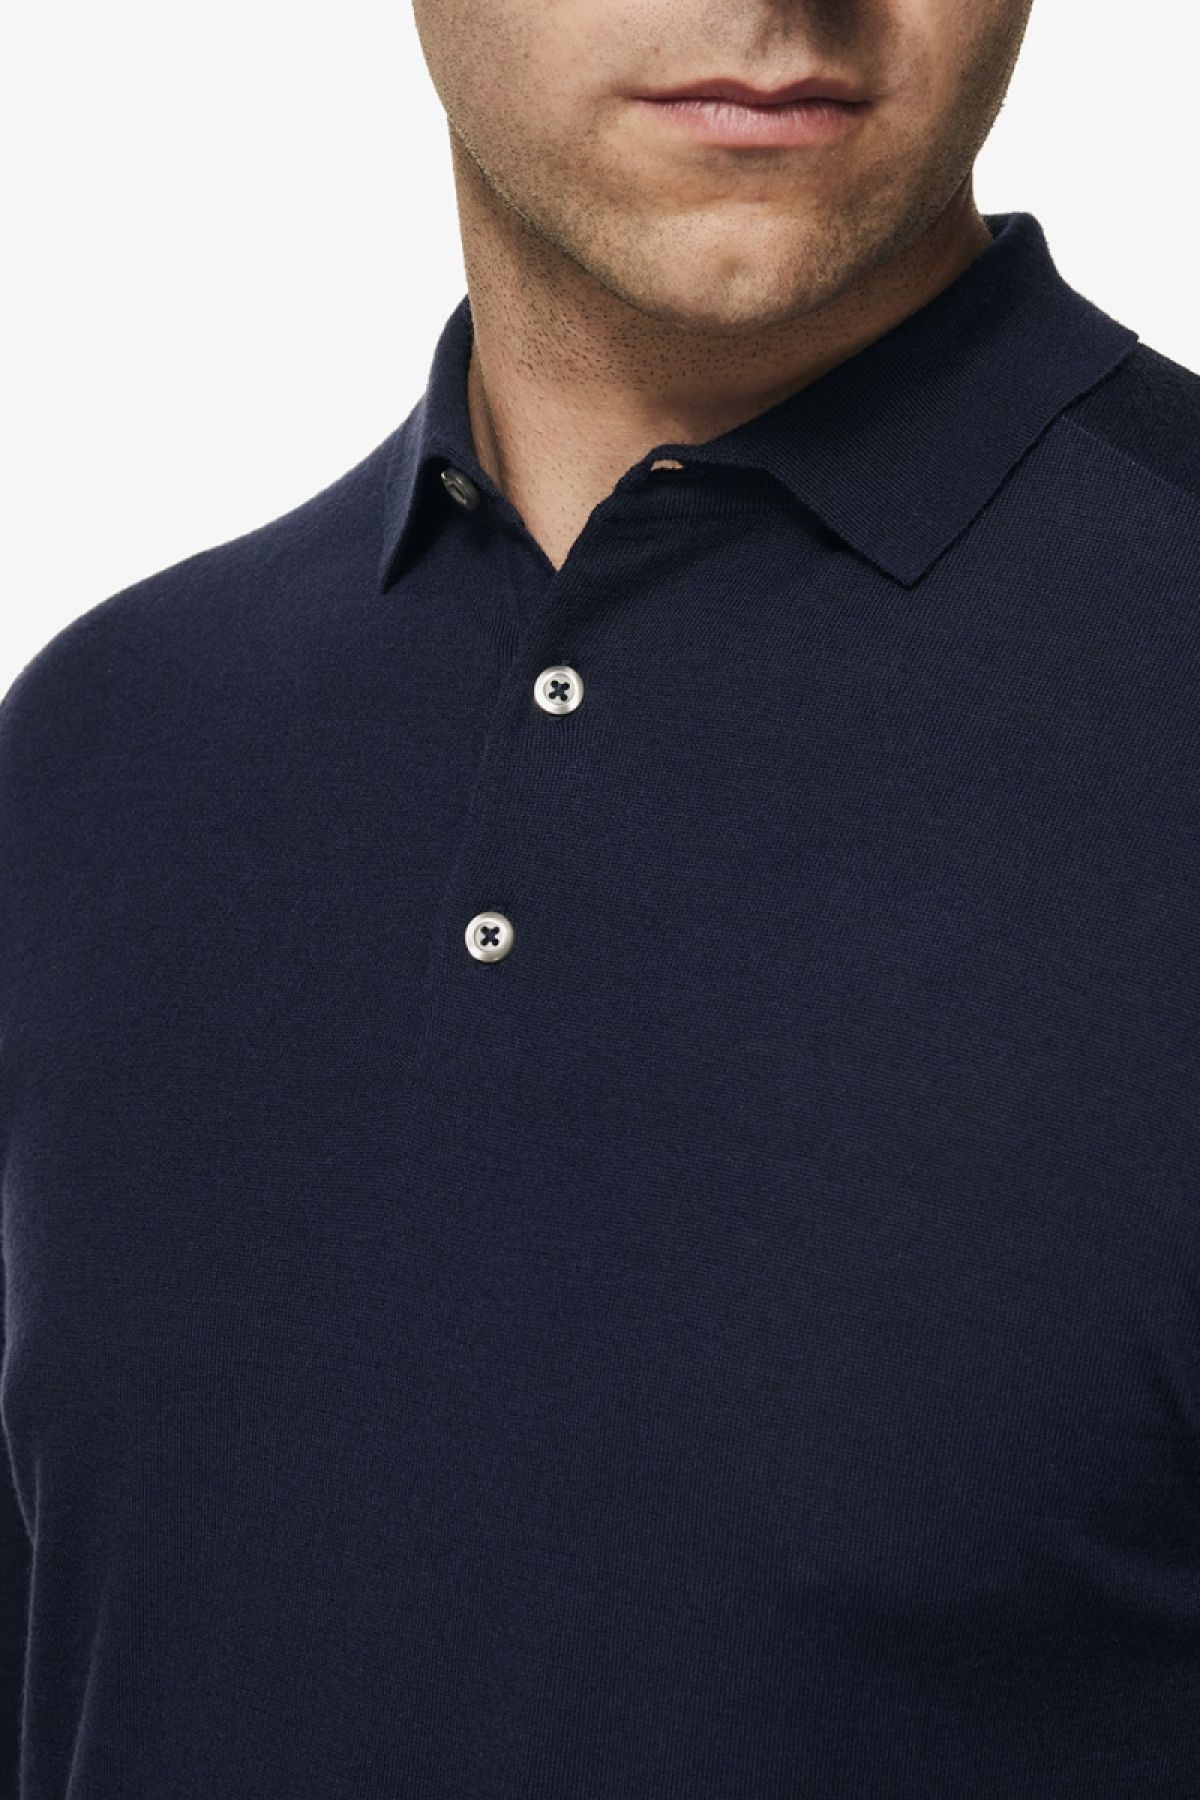 Gold polo donkerblauw